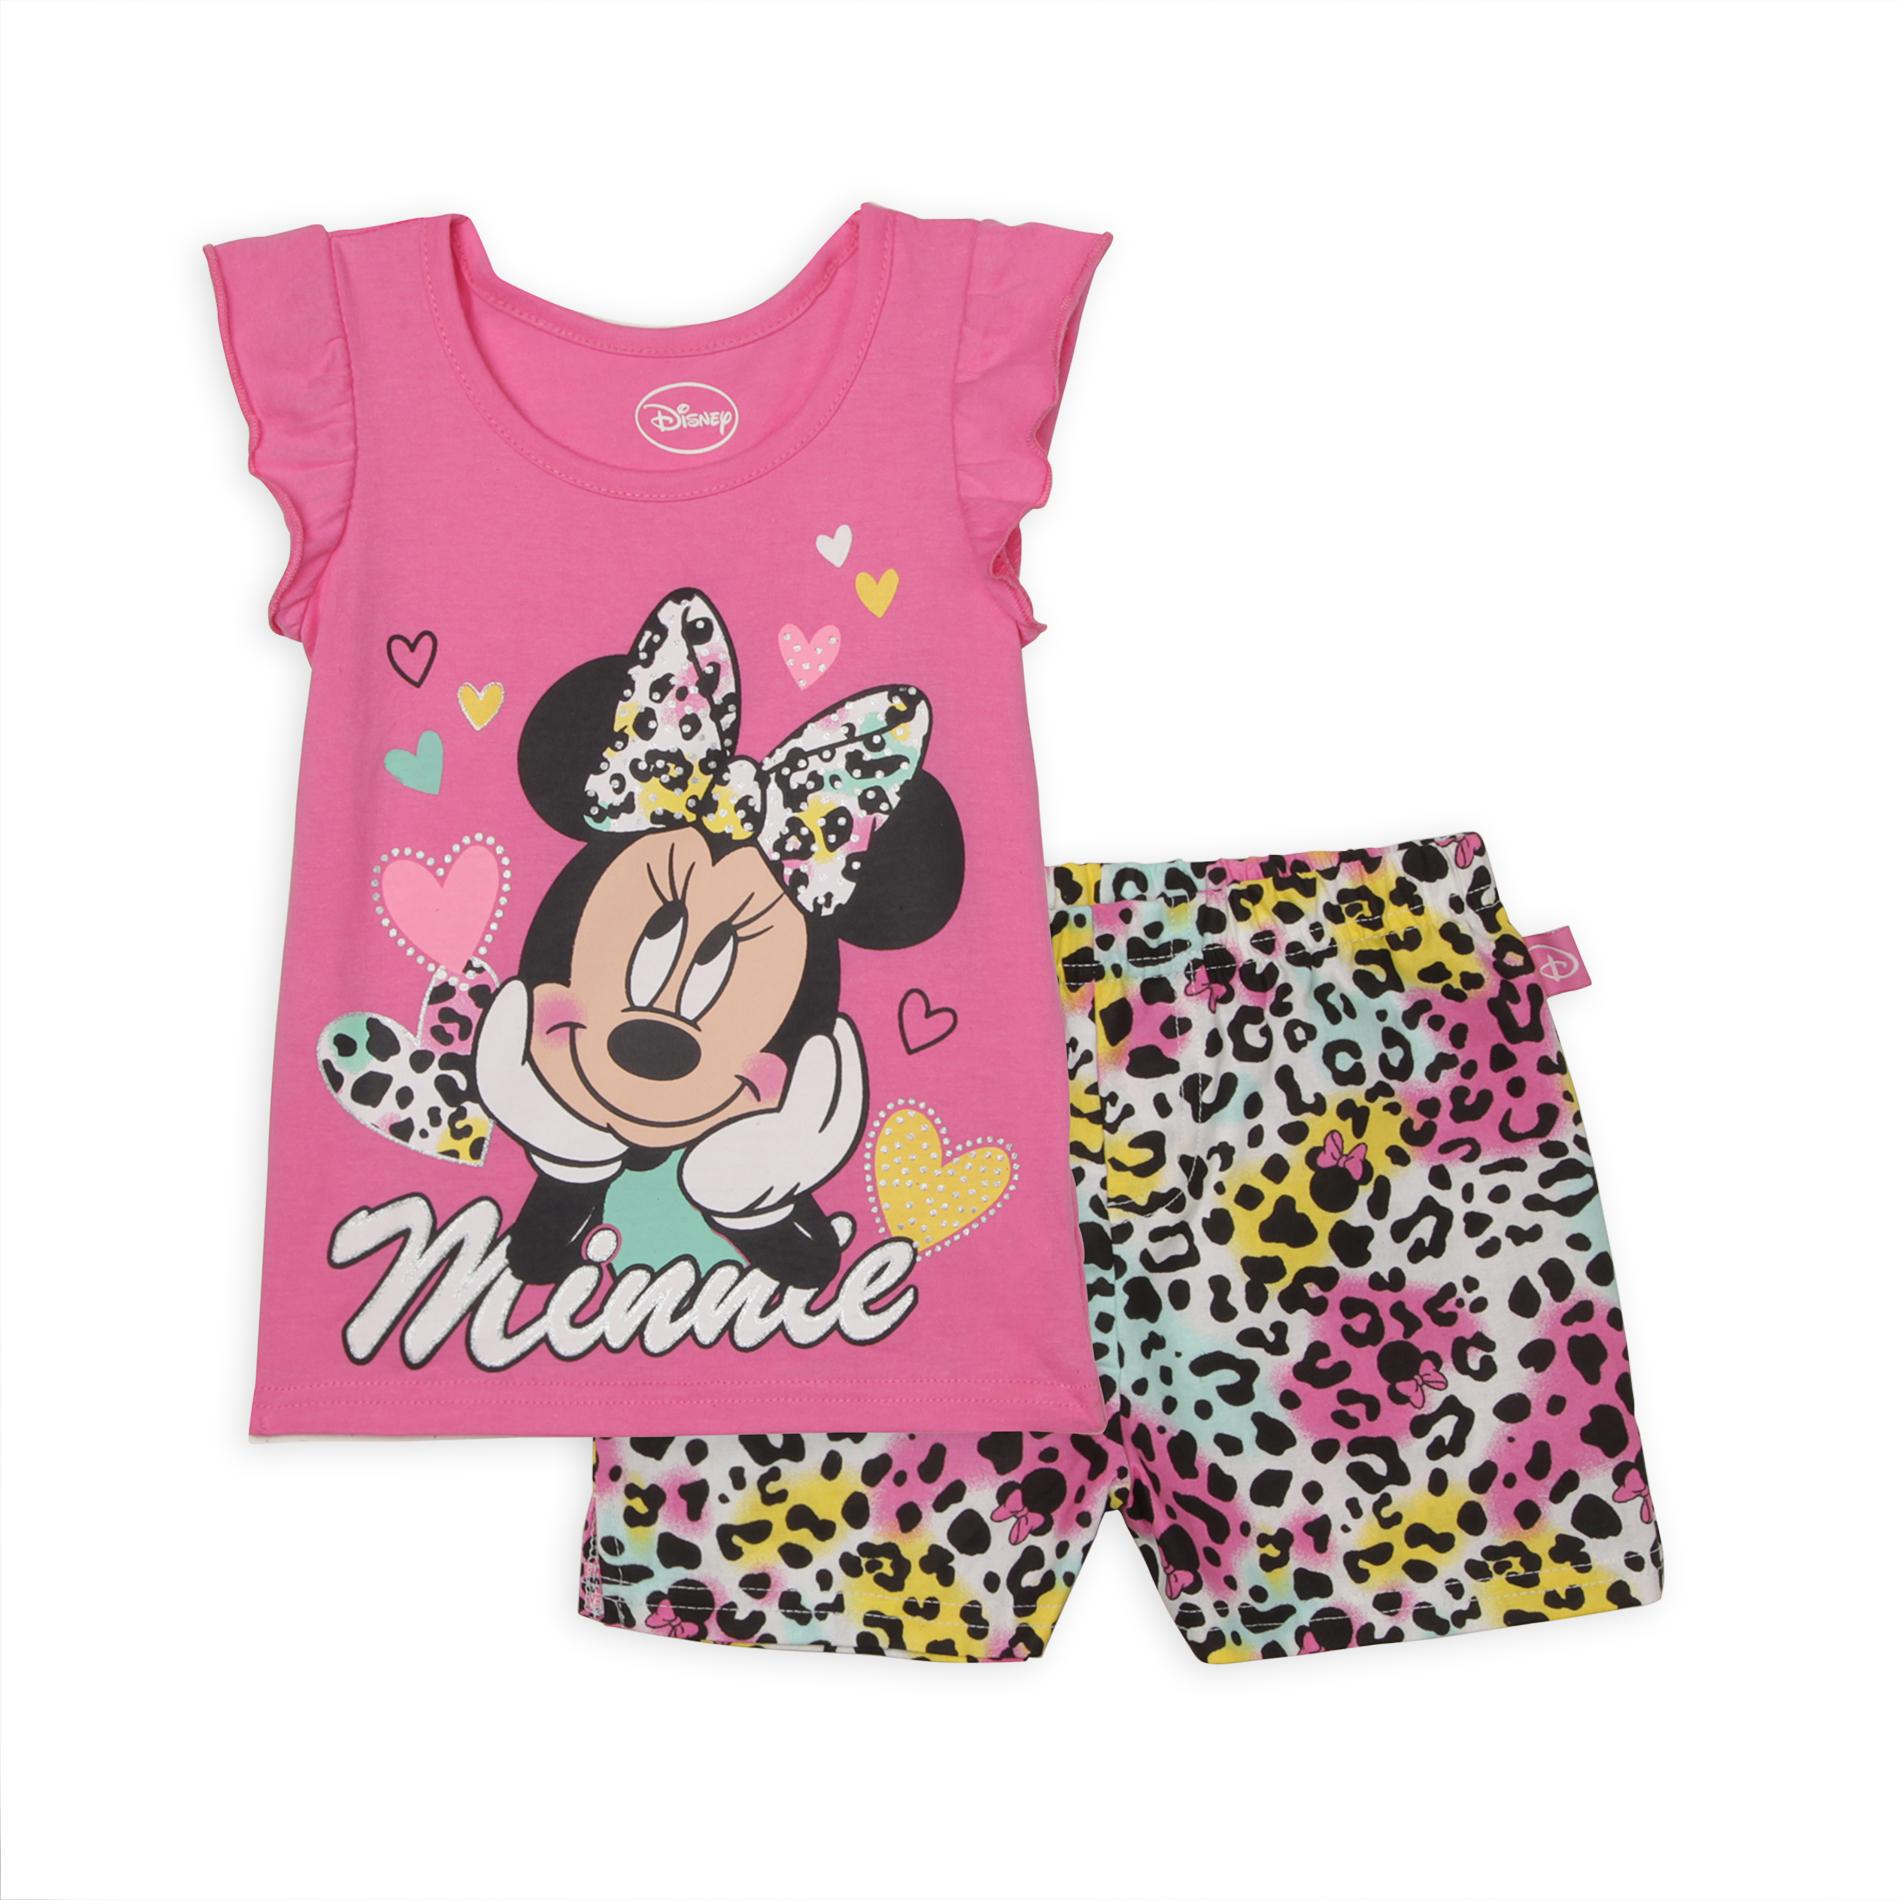 Disney Minnie Mouse Infant & Toddler Girl's Graphic T-Shirt & Shorts